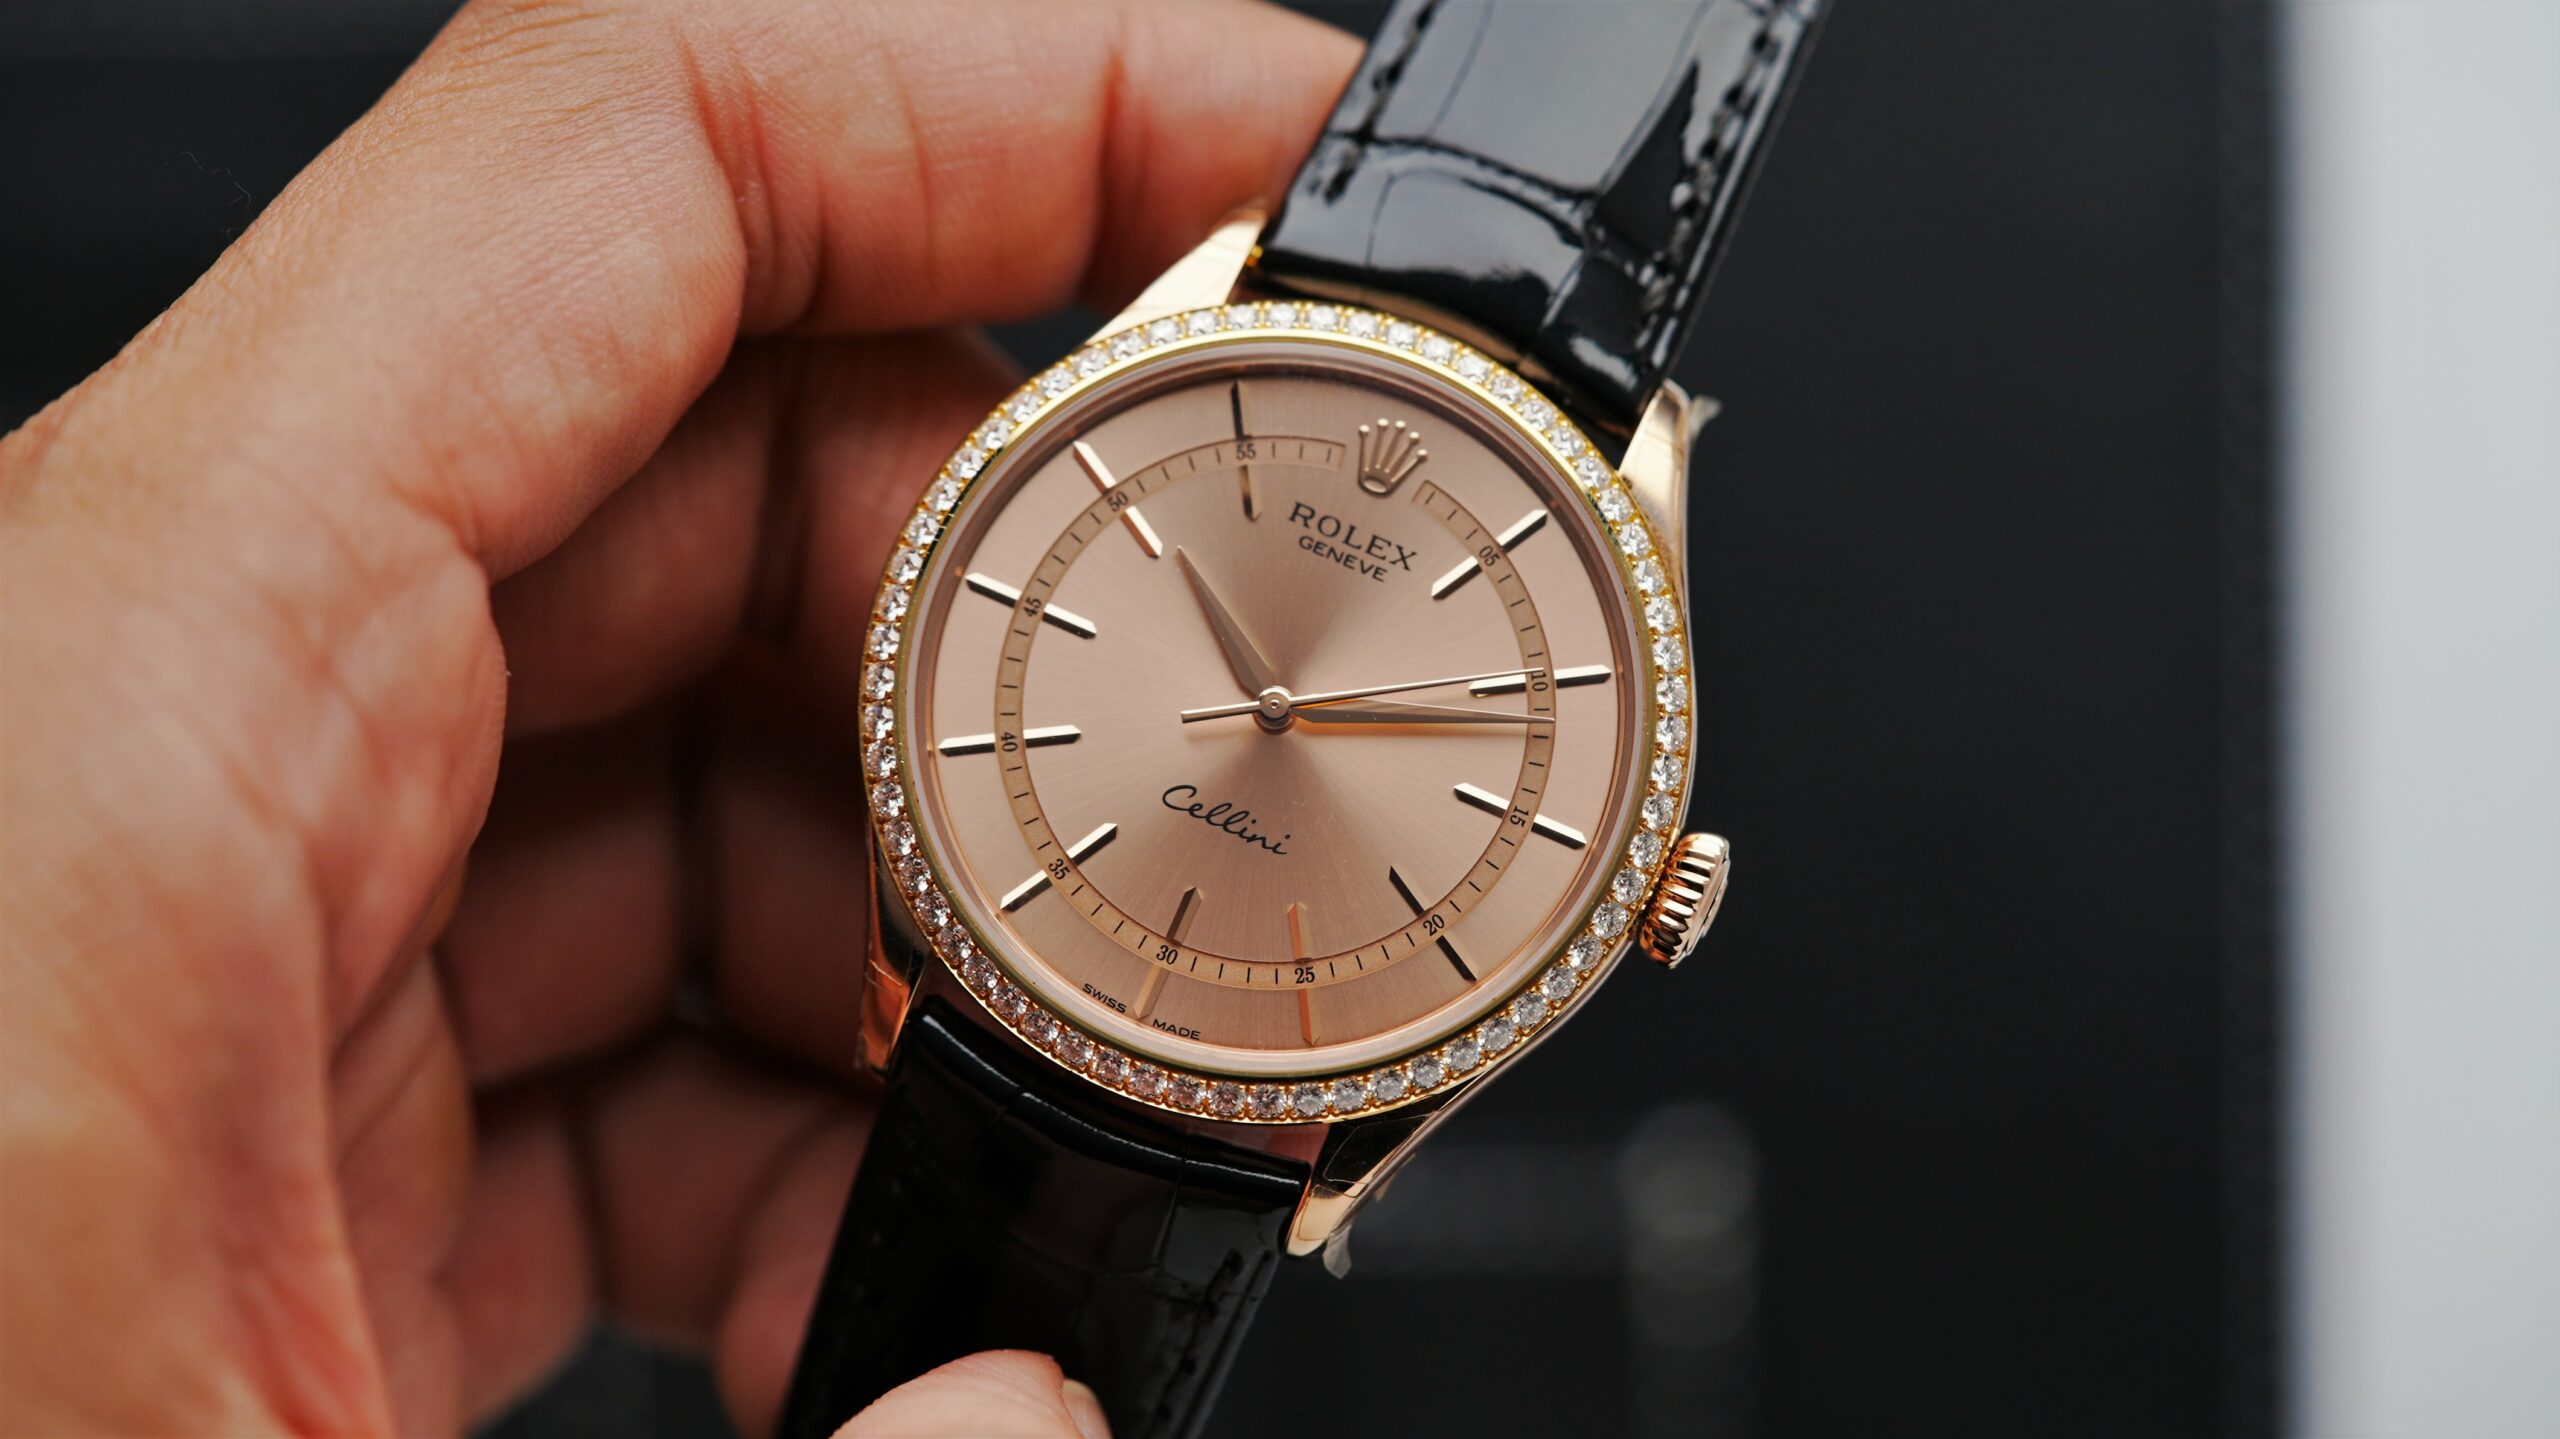 Rolex Cellini Time Salmon Rose Gold watch being held in hand.